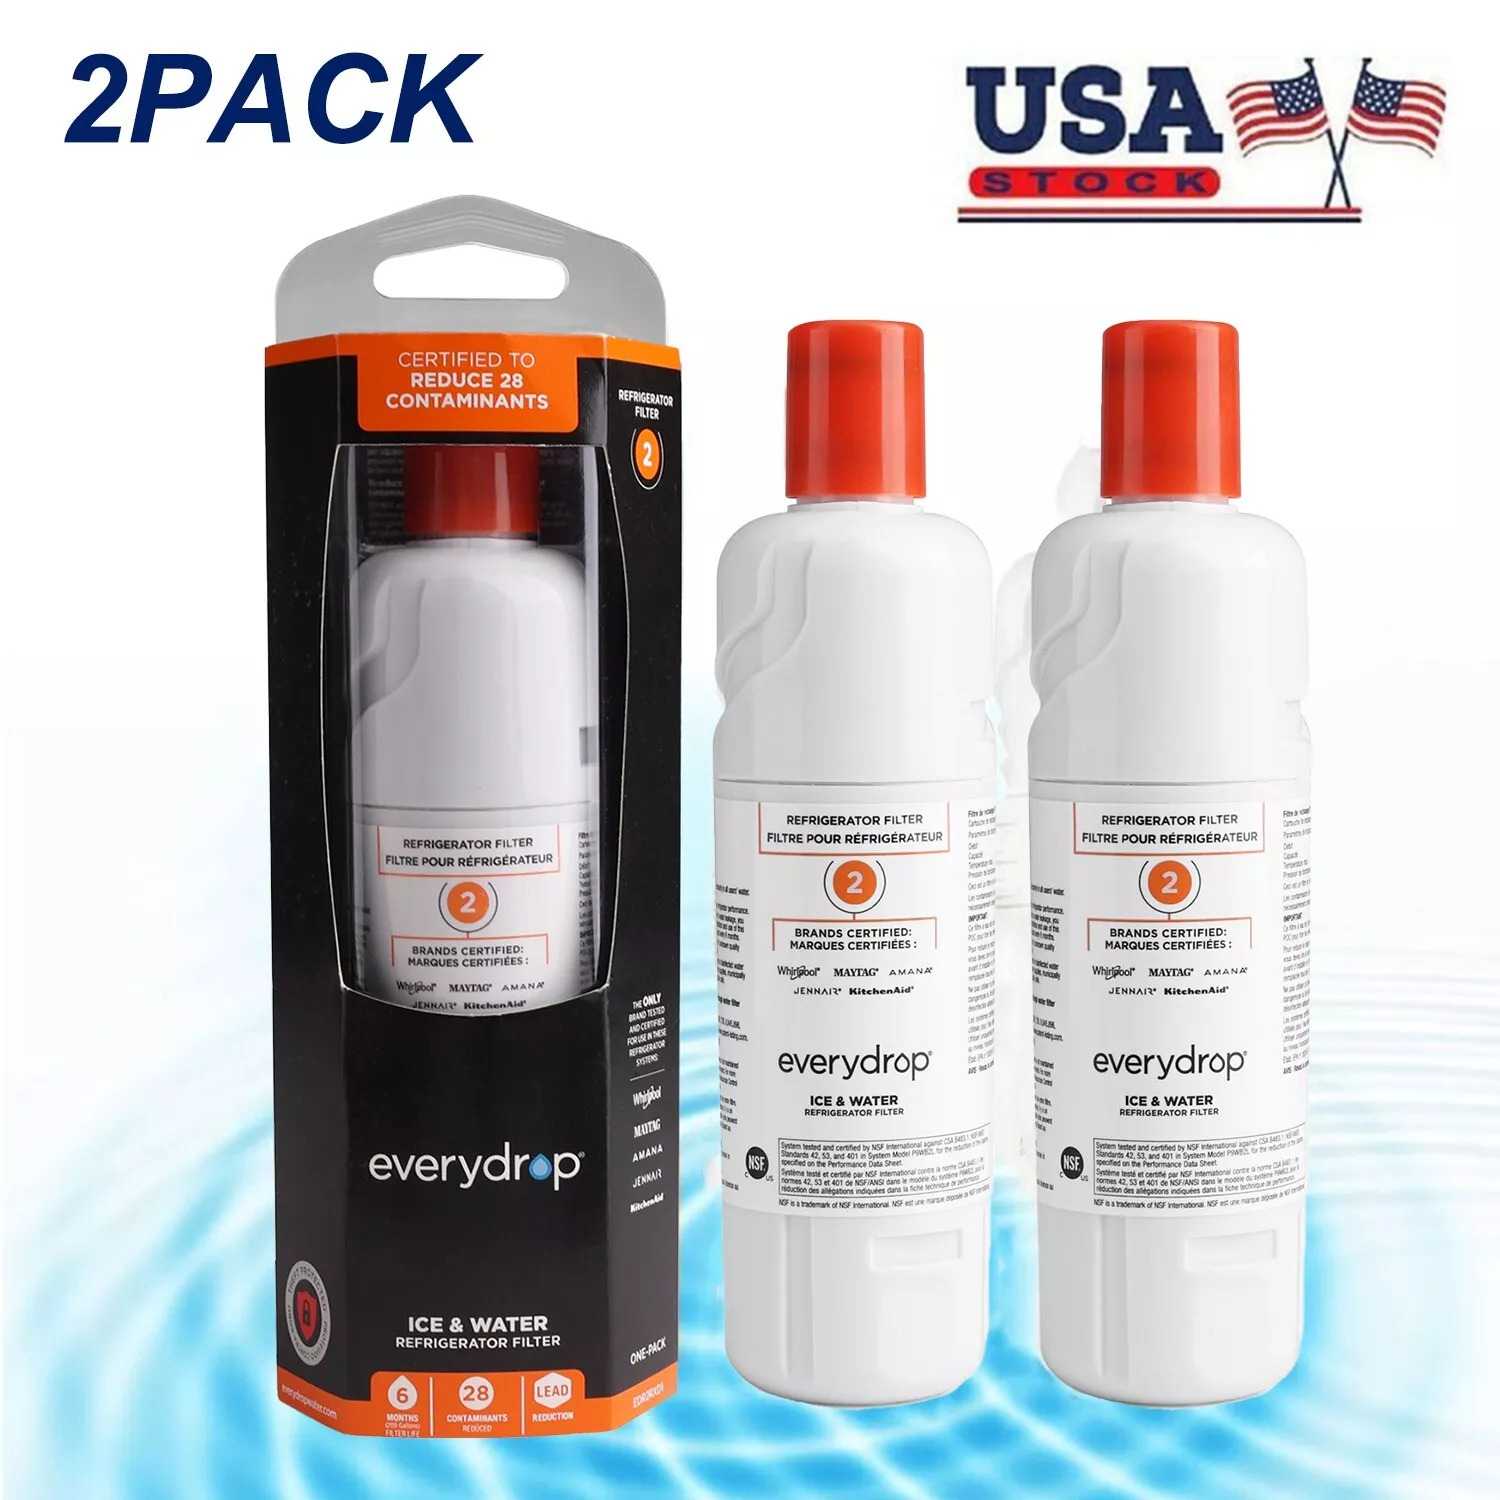 New 2 PACK ΕVΕRYDROP ΕDR2RXD1 Refrigerator Wate Filter 2 Home US FAST SHIP